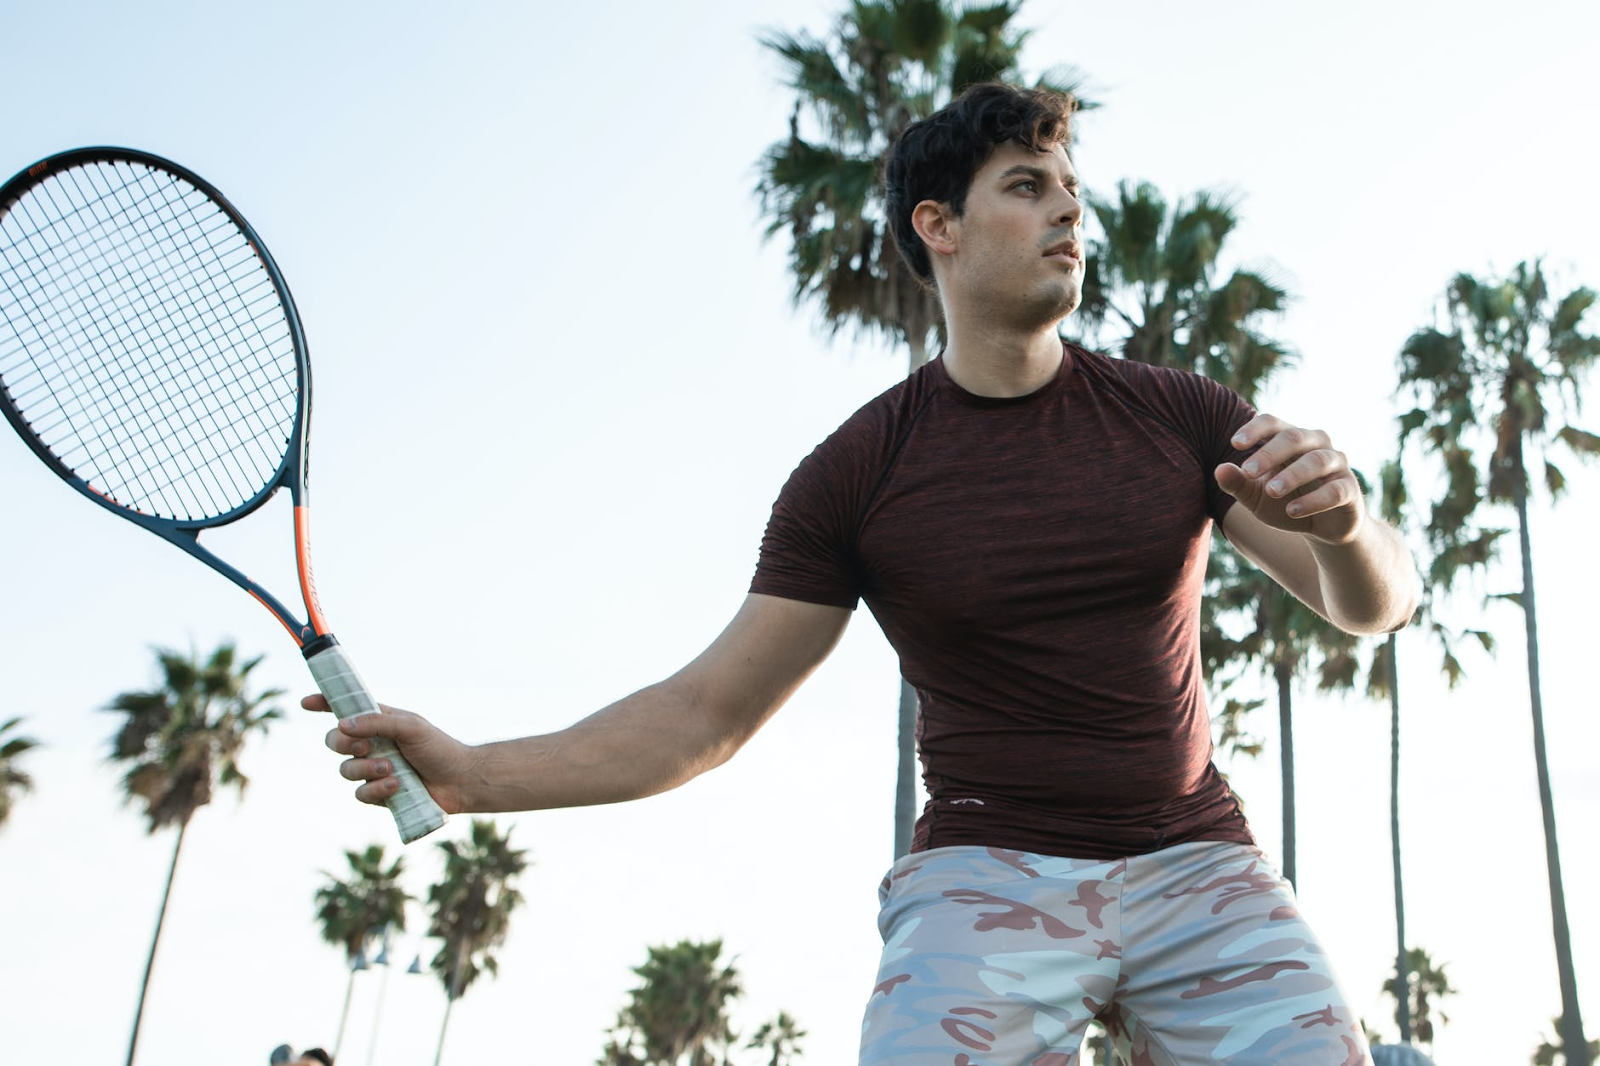 Love Tennis? Here’s How to Become Even Better At It